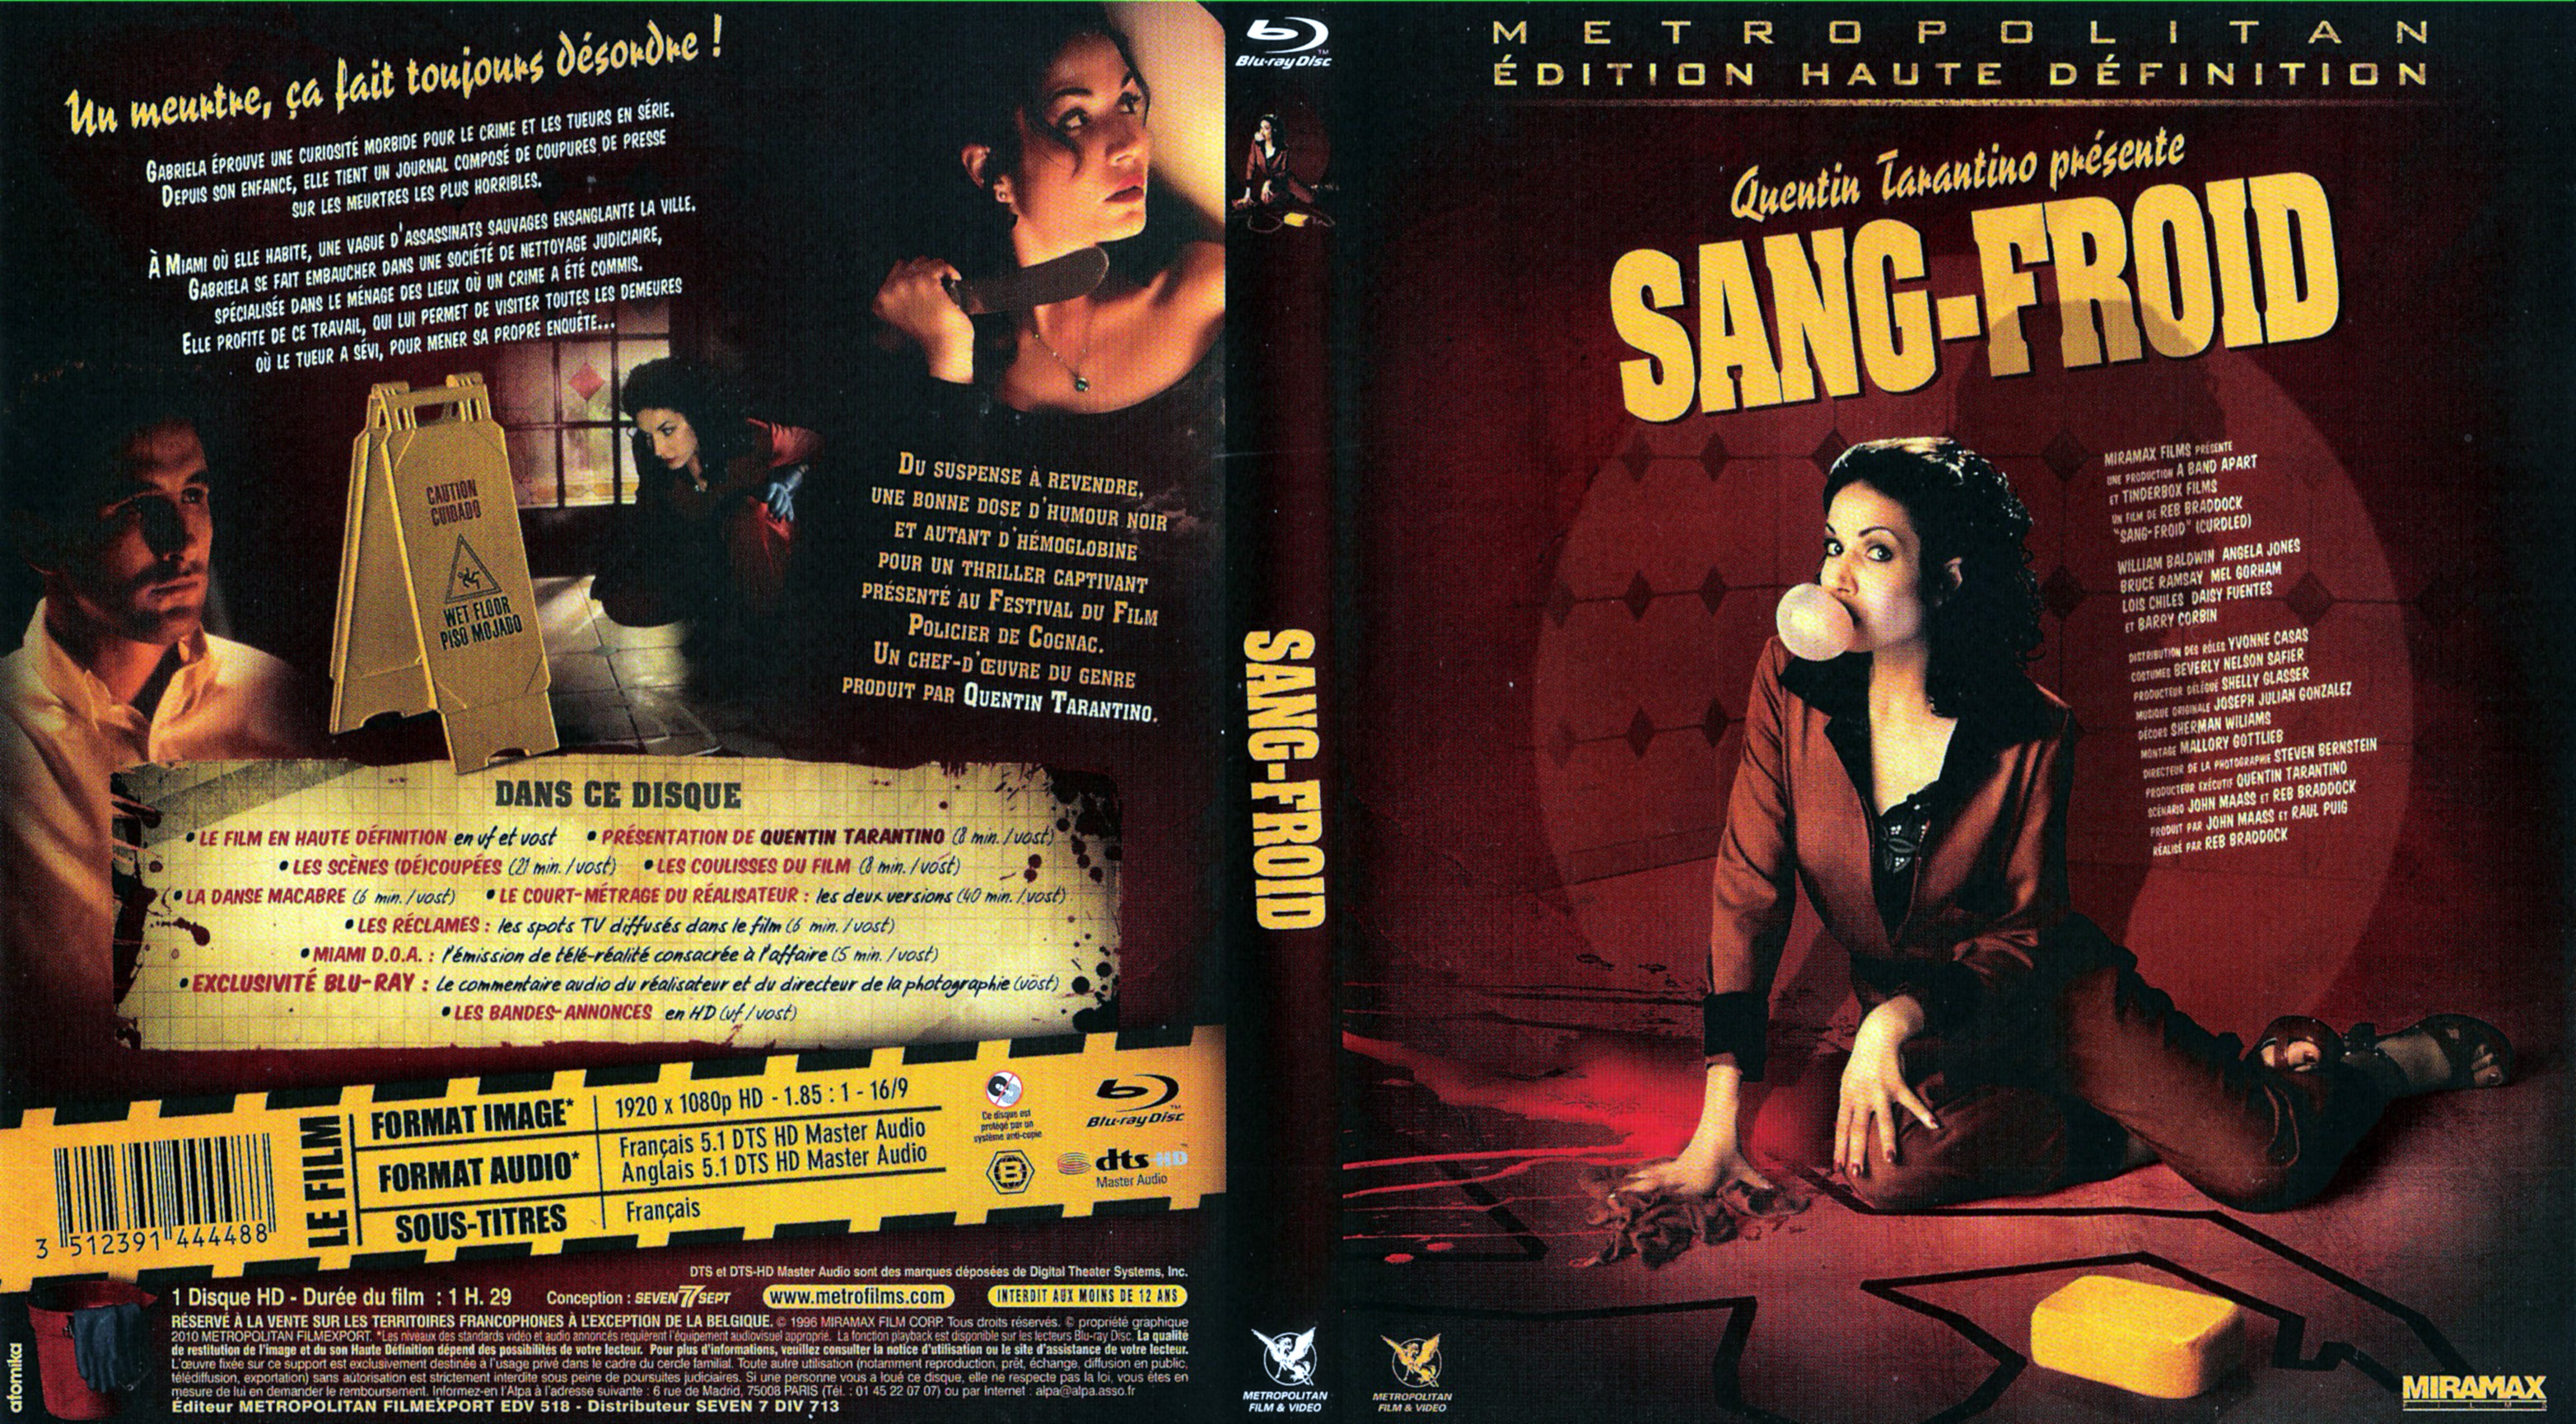 Jaquette DVD Sang-froid (BLU-RAY)